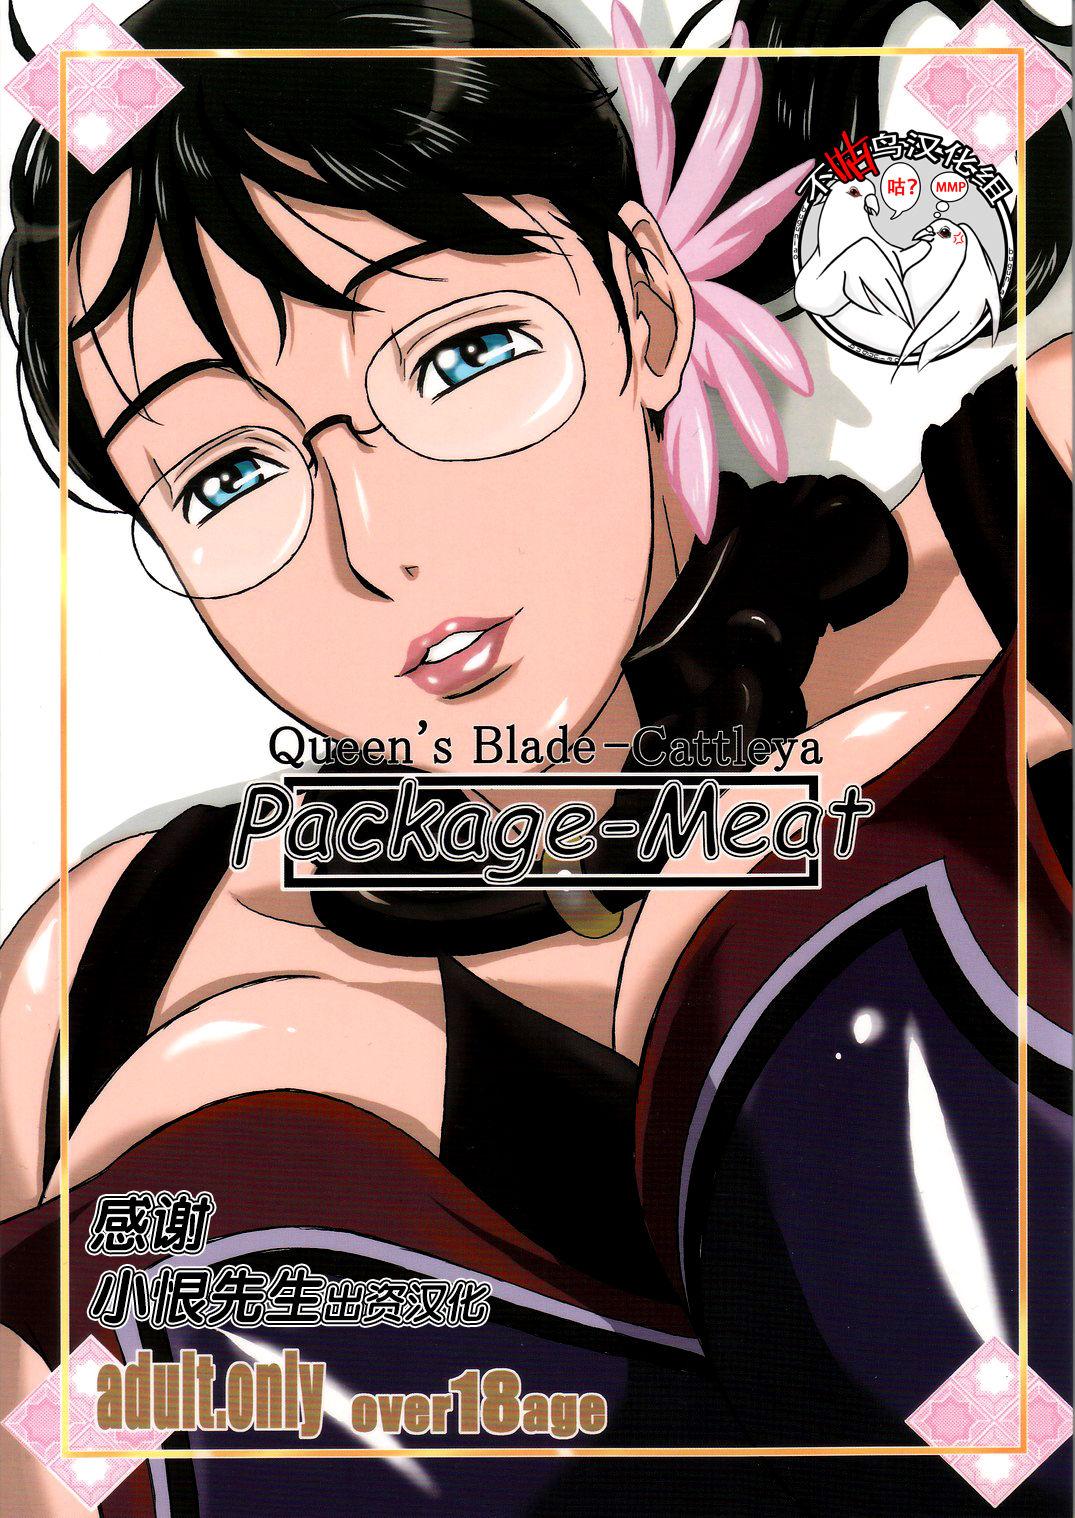 Pussysex (C72) [Shiawase Pullin Dou (Ninroku)] Package Meat (Queen's Blade) [Chinese] amateur coloring version - Queens blade Tats - Picture 1